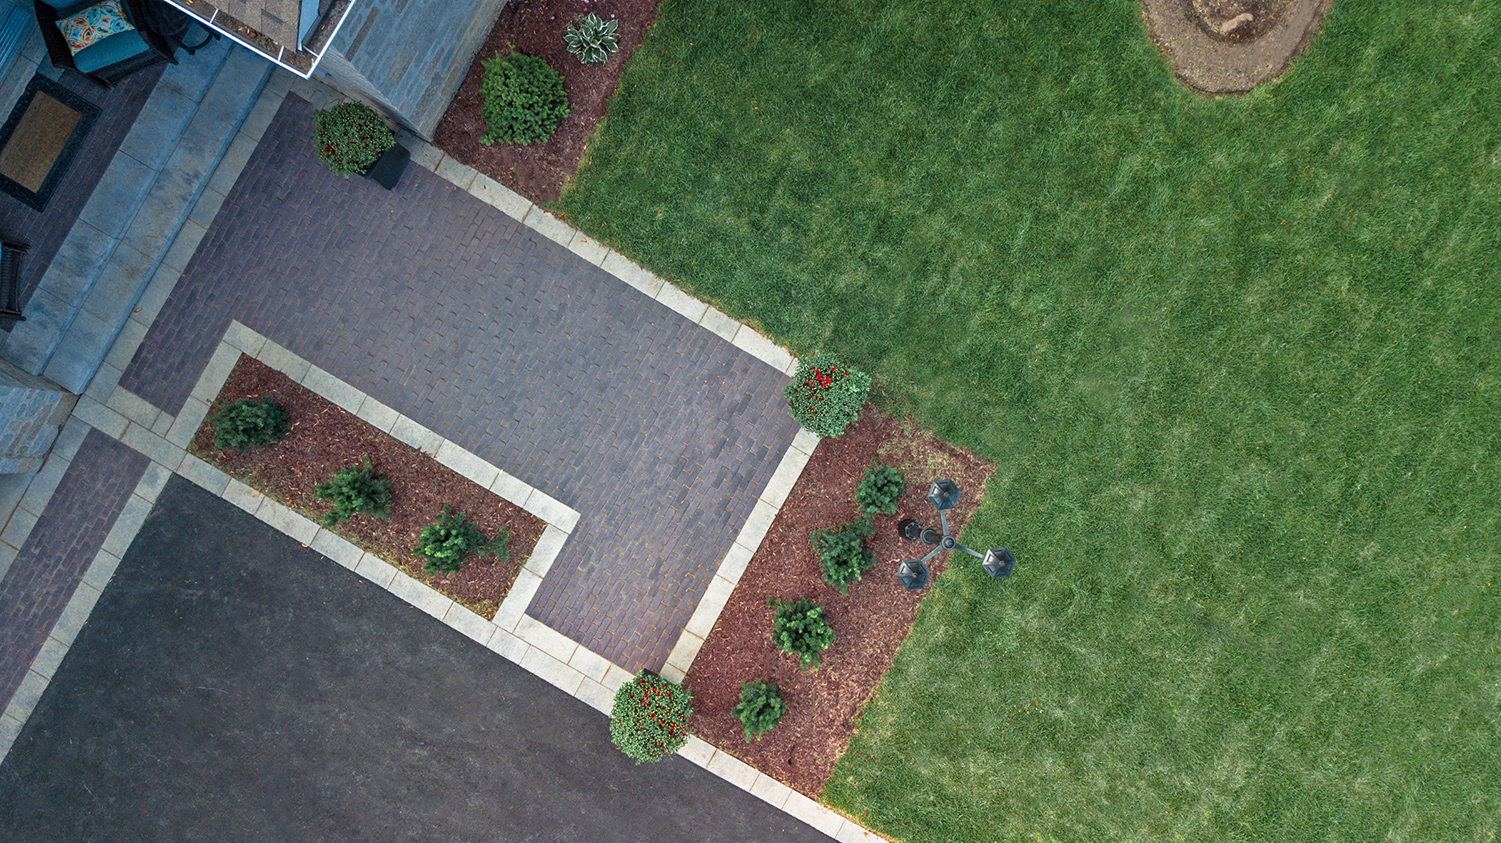 Aeriel photo of landscaping and concrete done by DLC teams